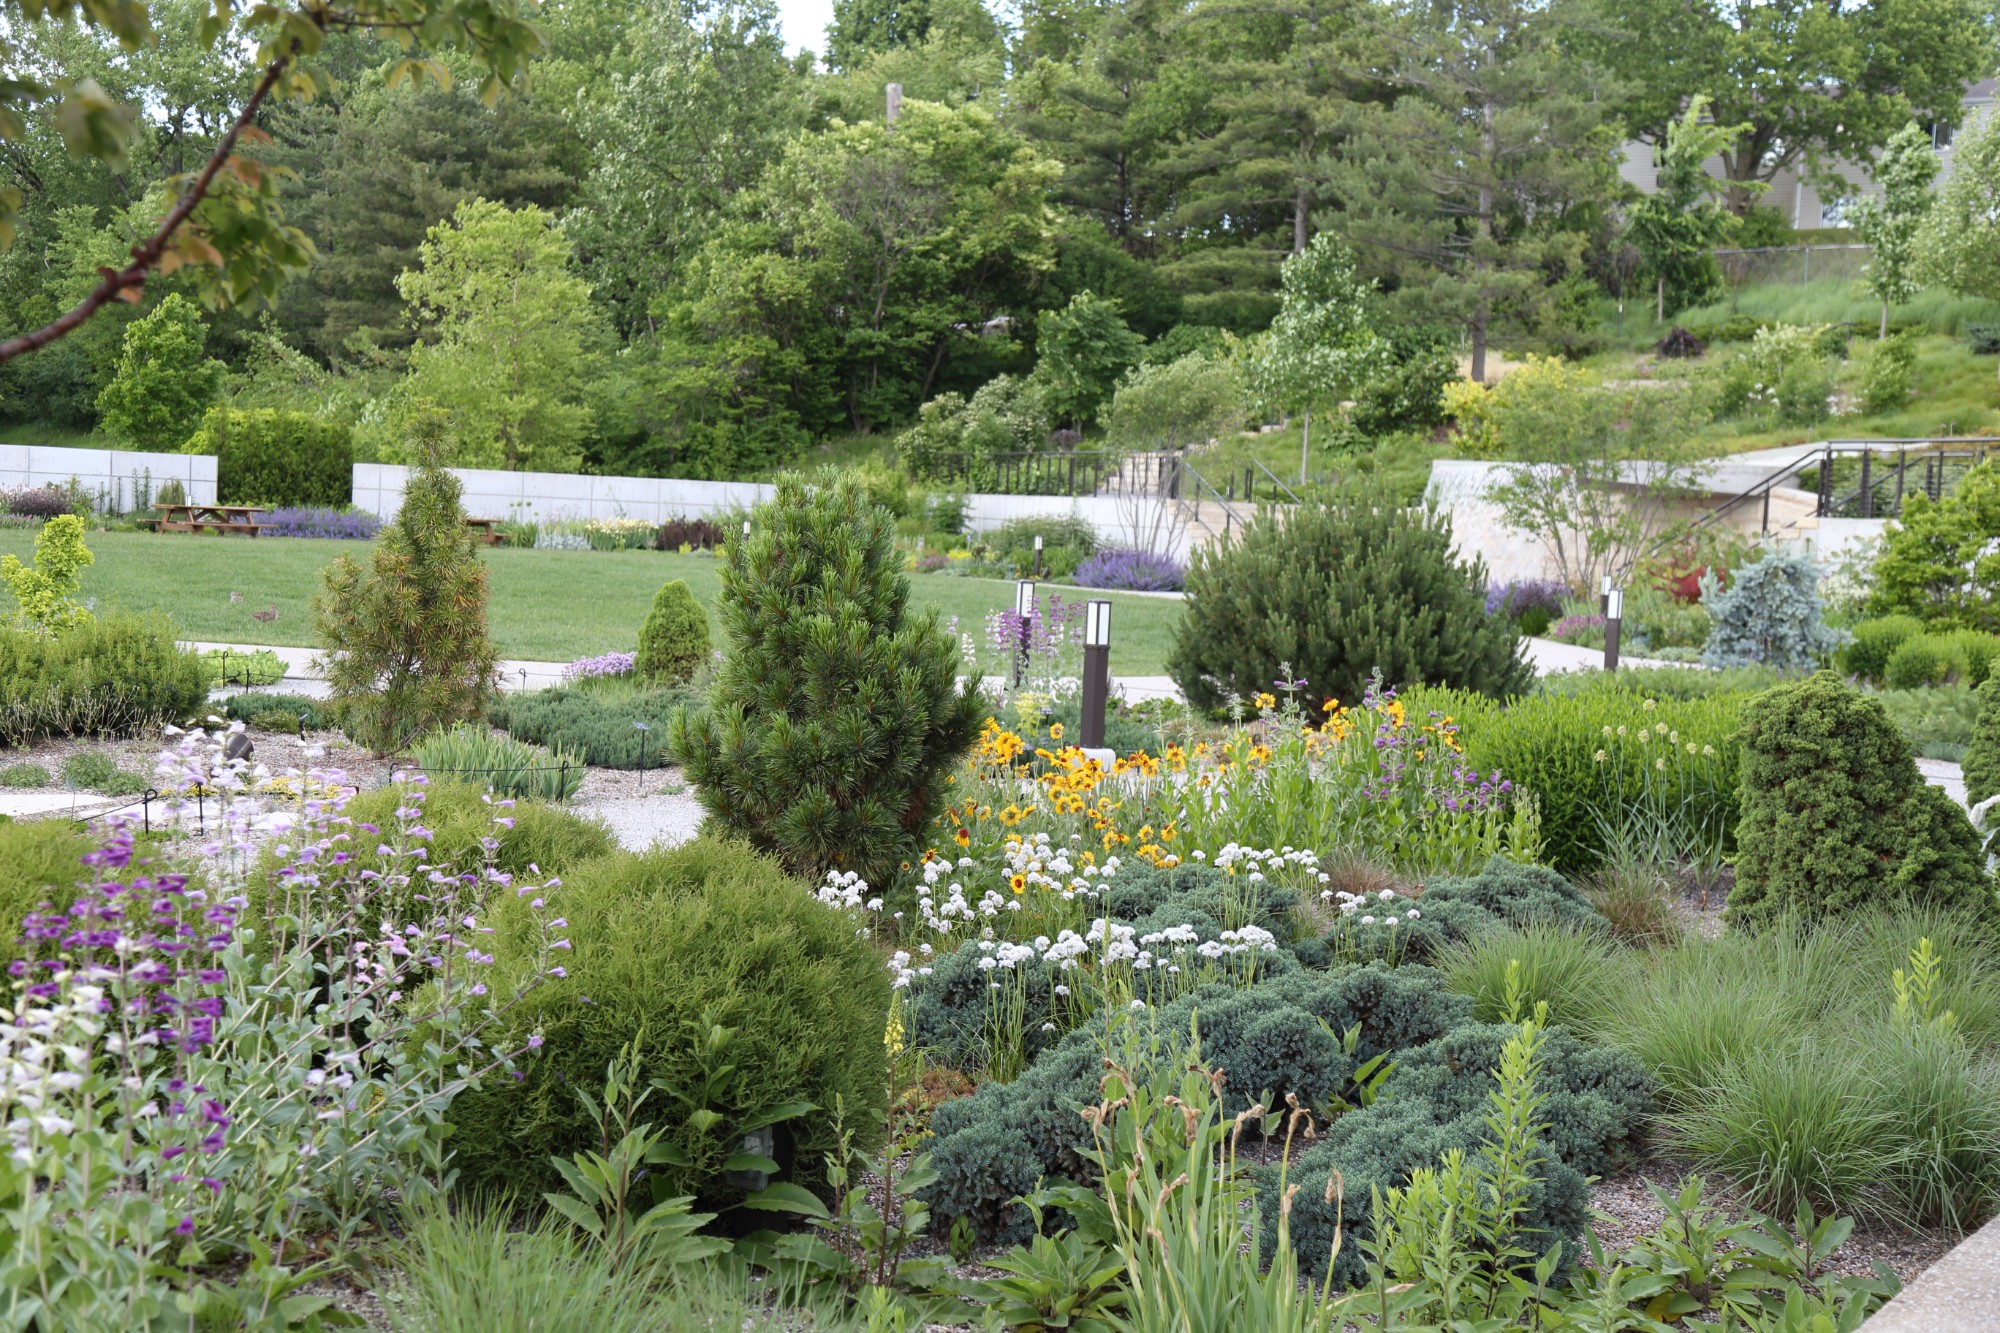 The Rutledge Conifer Garden, May 2017. Photo by Kelly Norris.